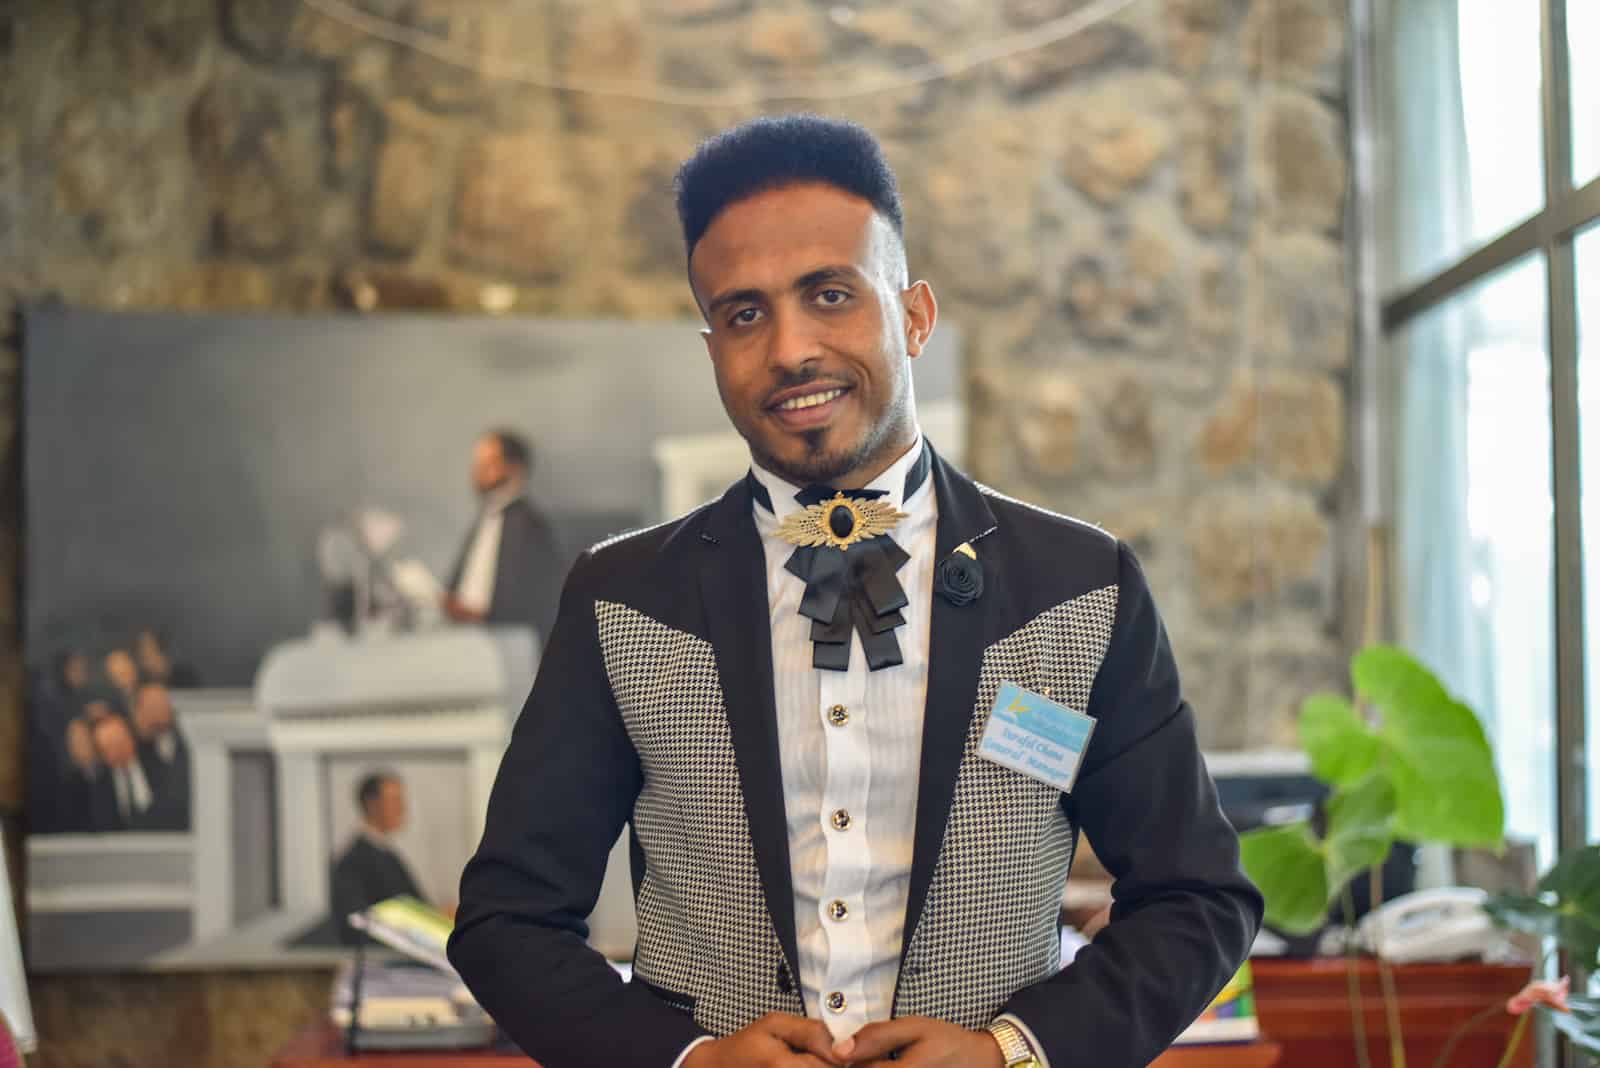 A man stands in a hotel lobby wearing a black, white and gray suit.